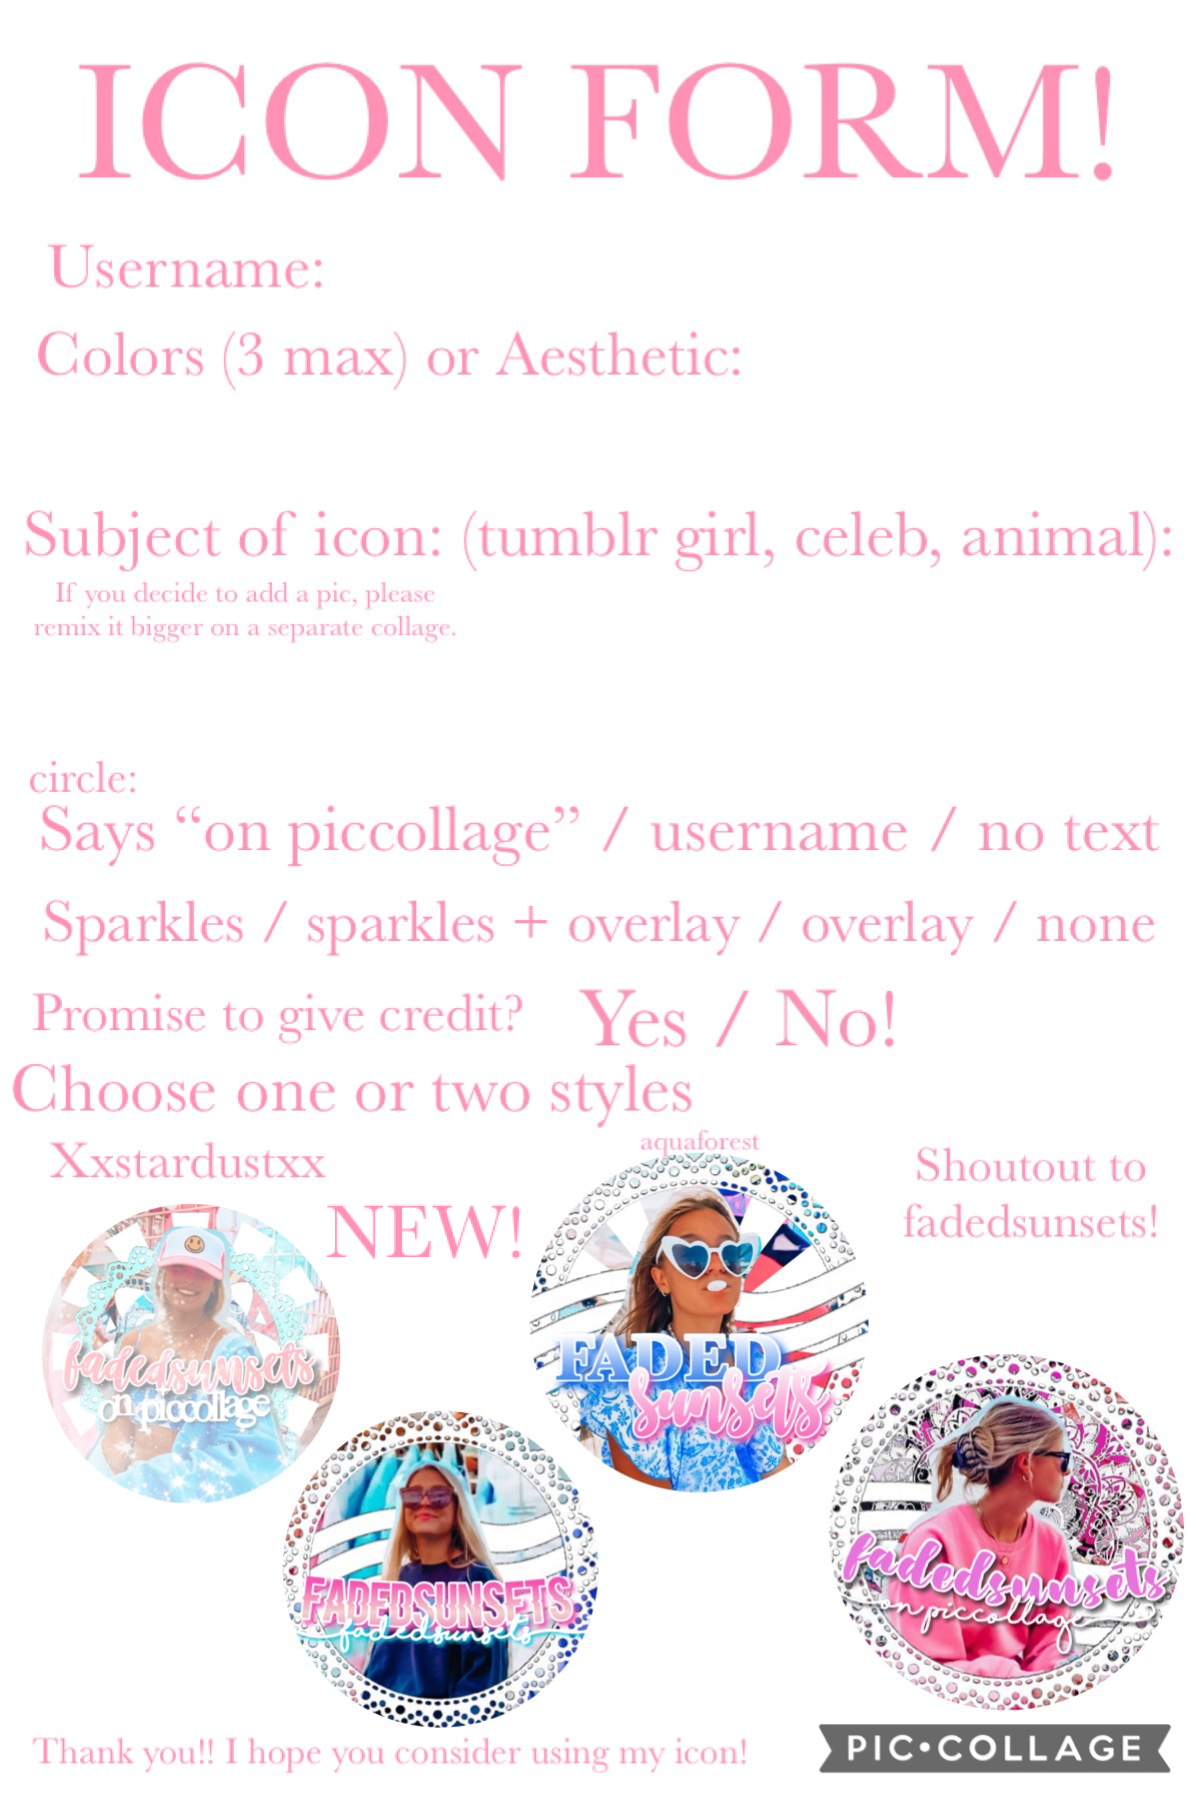 I kinda said I swore off icons, but I want to give them another try! Please fill out the form!
